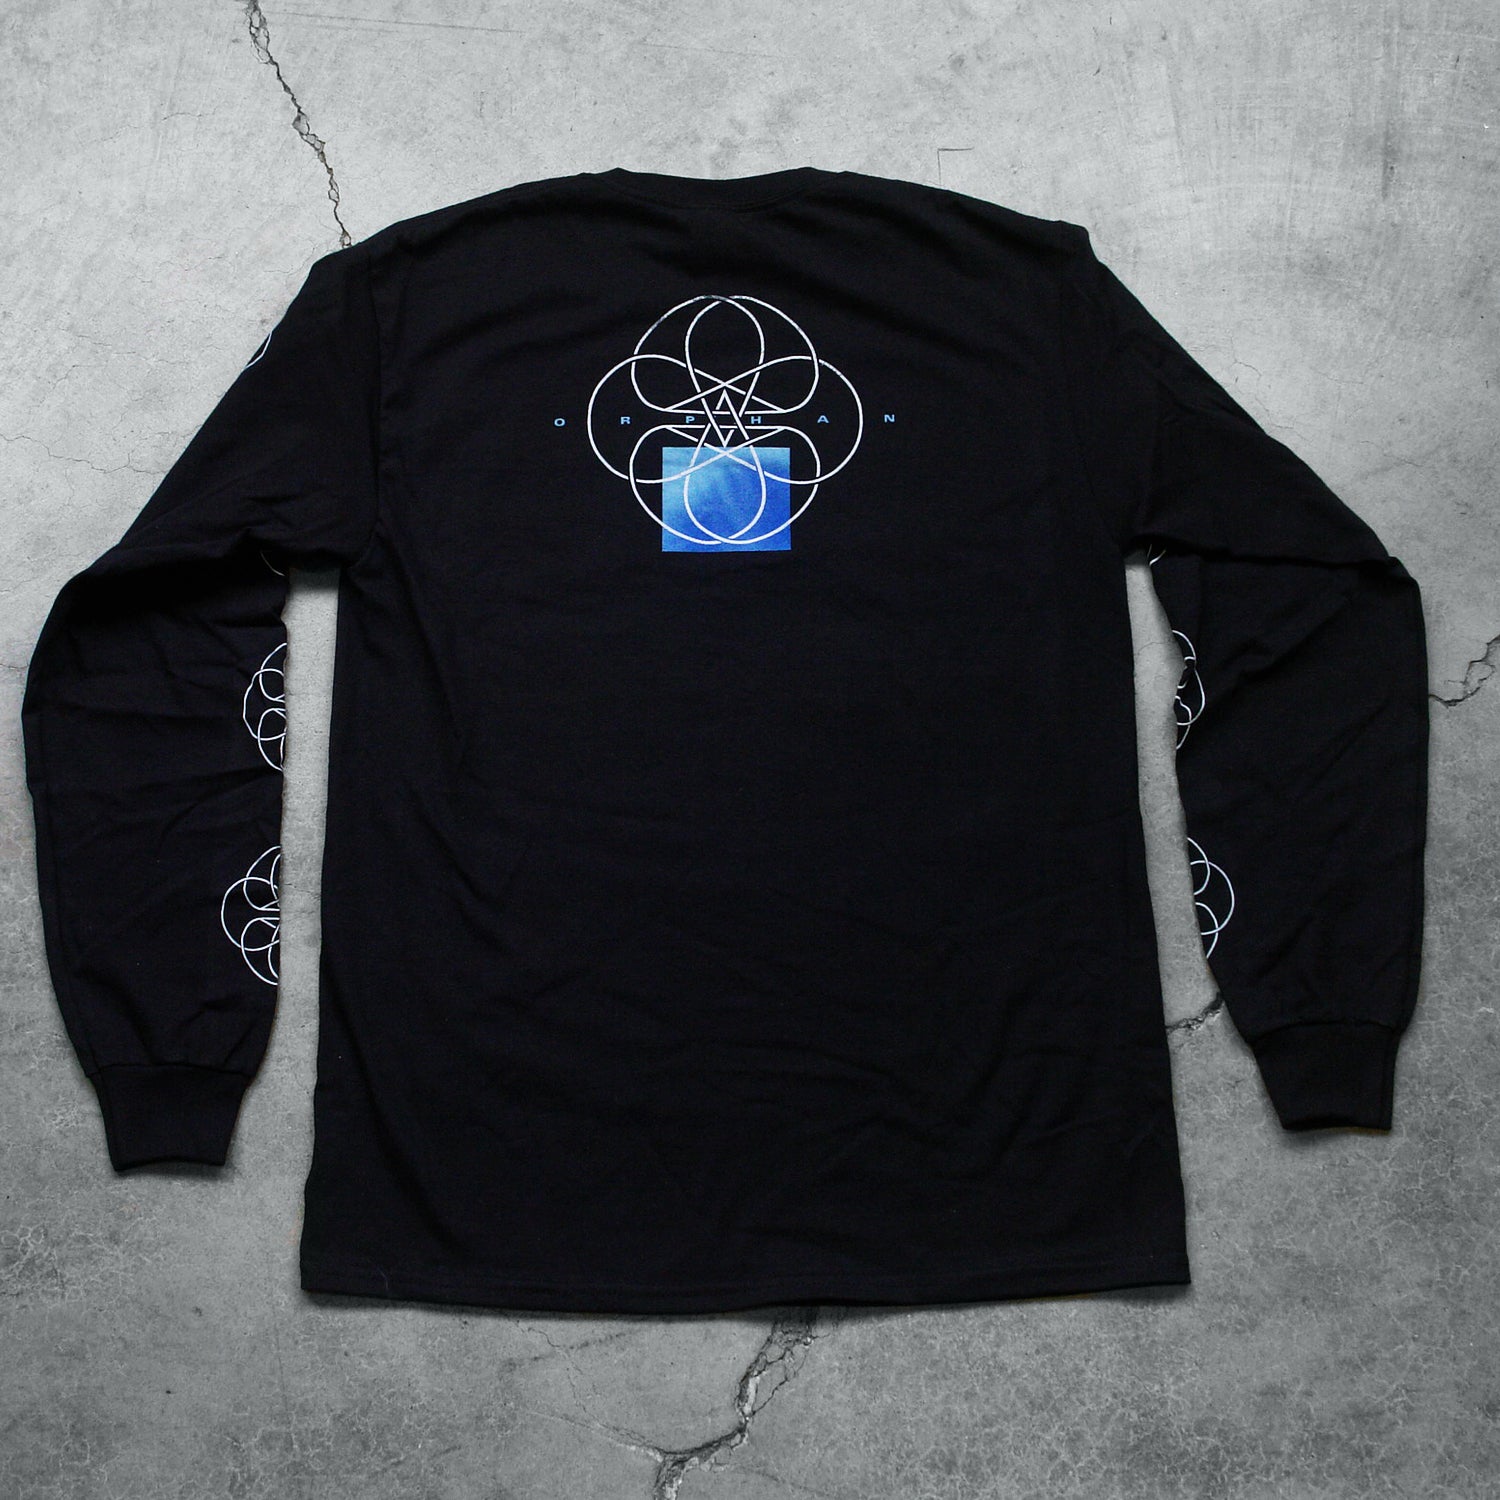  Image of the back of a black long sleeve against a grey concrete background. The sleeves feature a white circle abstract design with lines and two stars in the center making a double pentagram. The back center of the shirt near the shoulders features a white circle outline with abstract lines in the center, and two stars making a double pentagram. a blue square is underneath this. In small blue text reads "orphan". This is placed across the circle design.